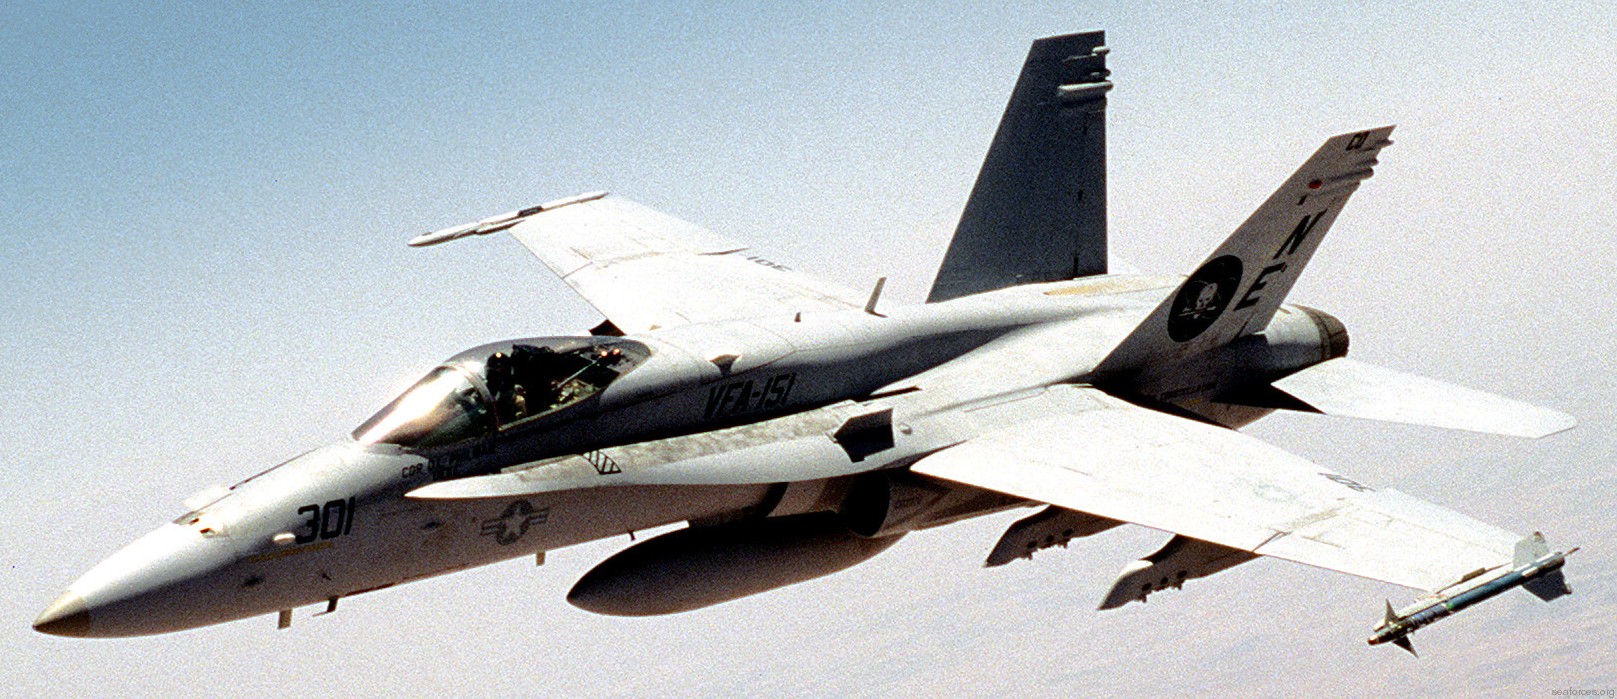 vfa-151 vigilantes strike fighter squadron navy f/a-18c hornet carrier air wing cvw-2 78